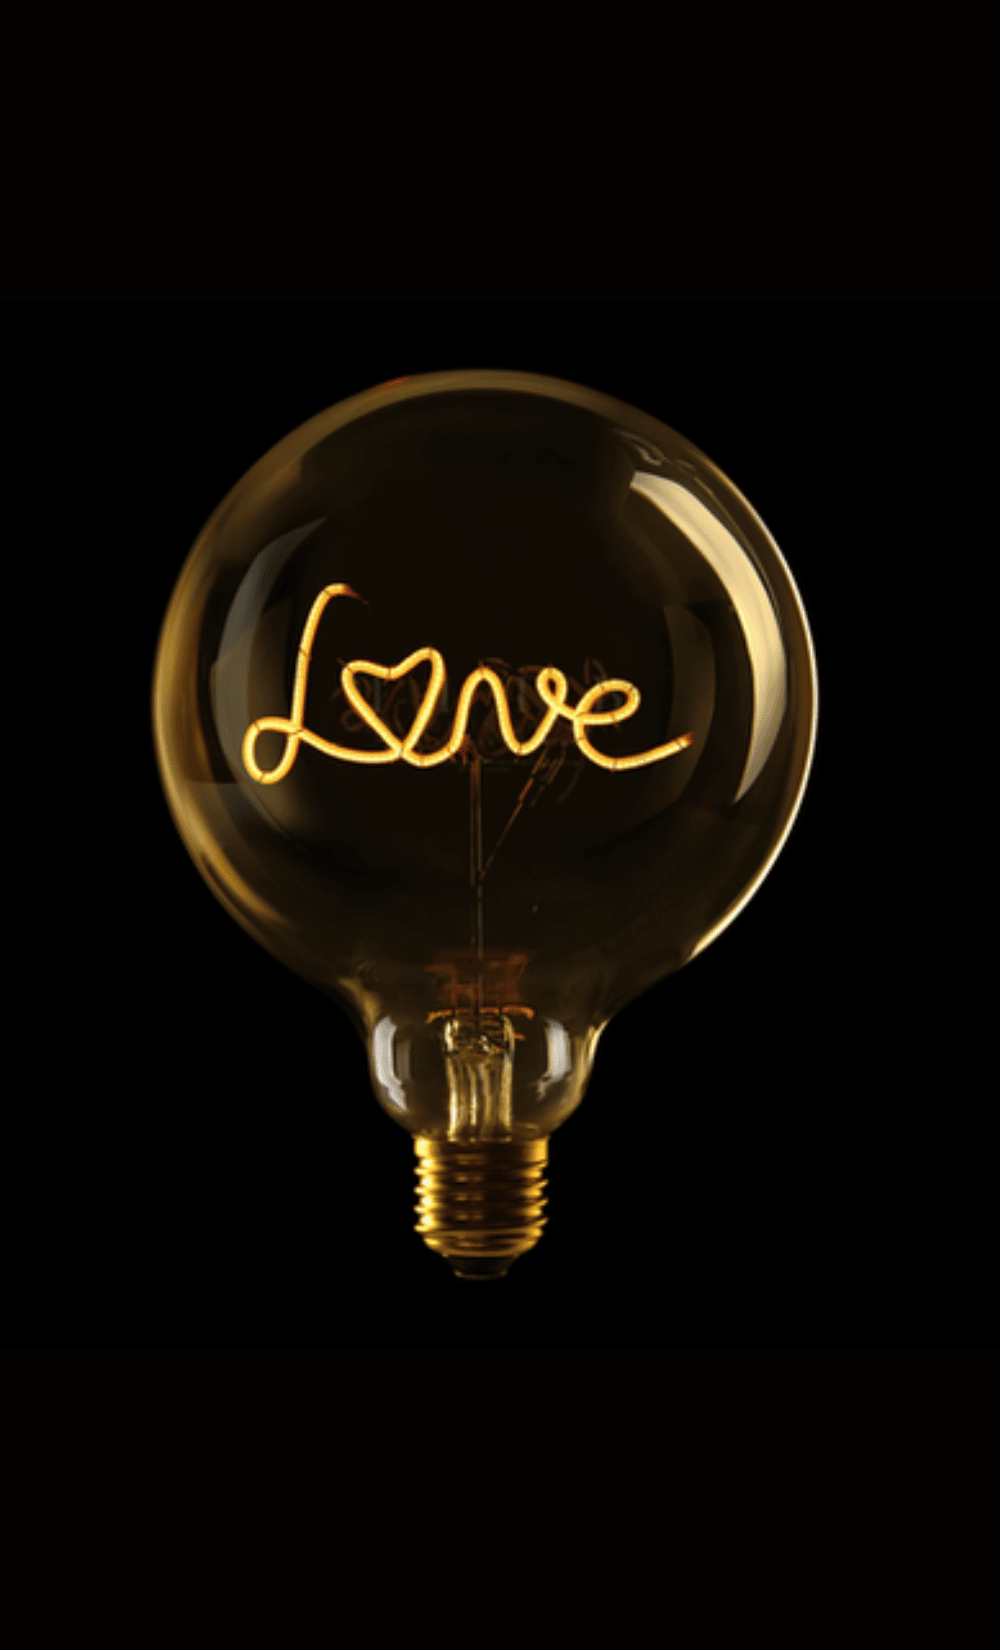 trinity-message-in-the-bulb-love